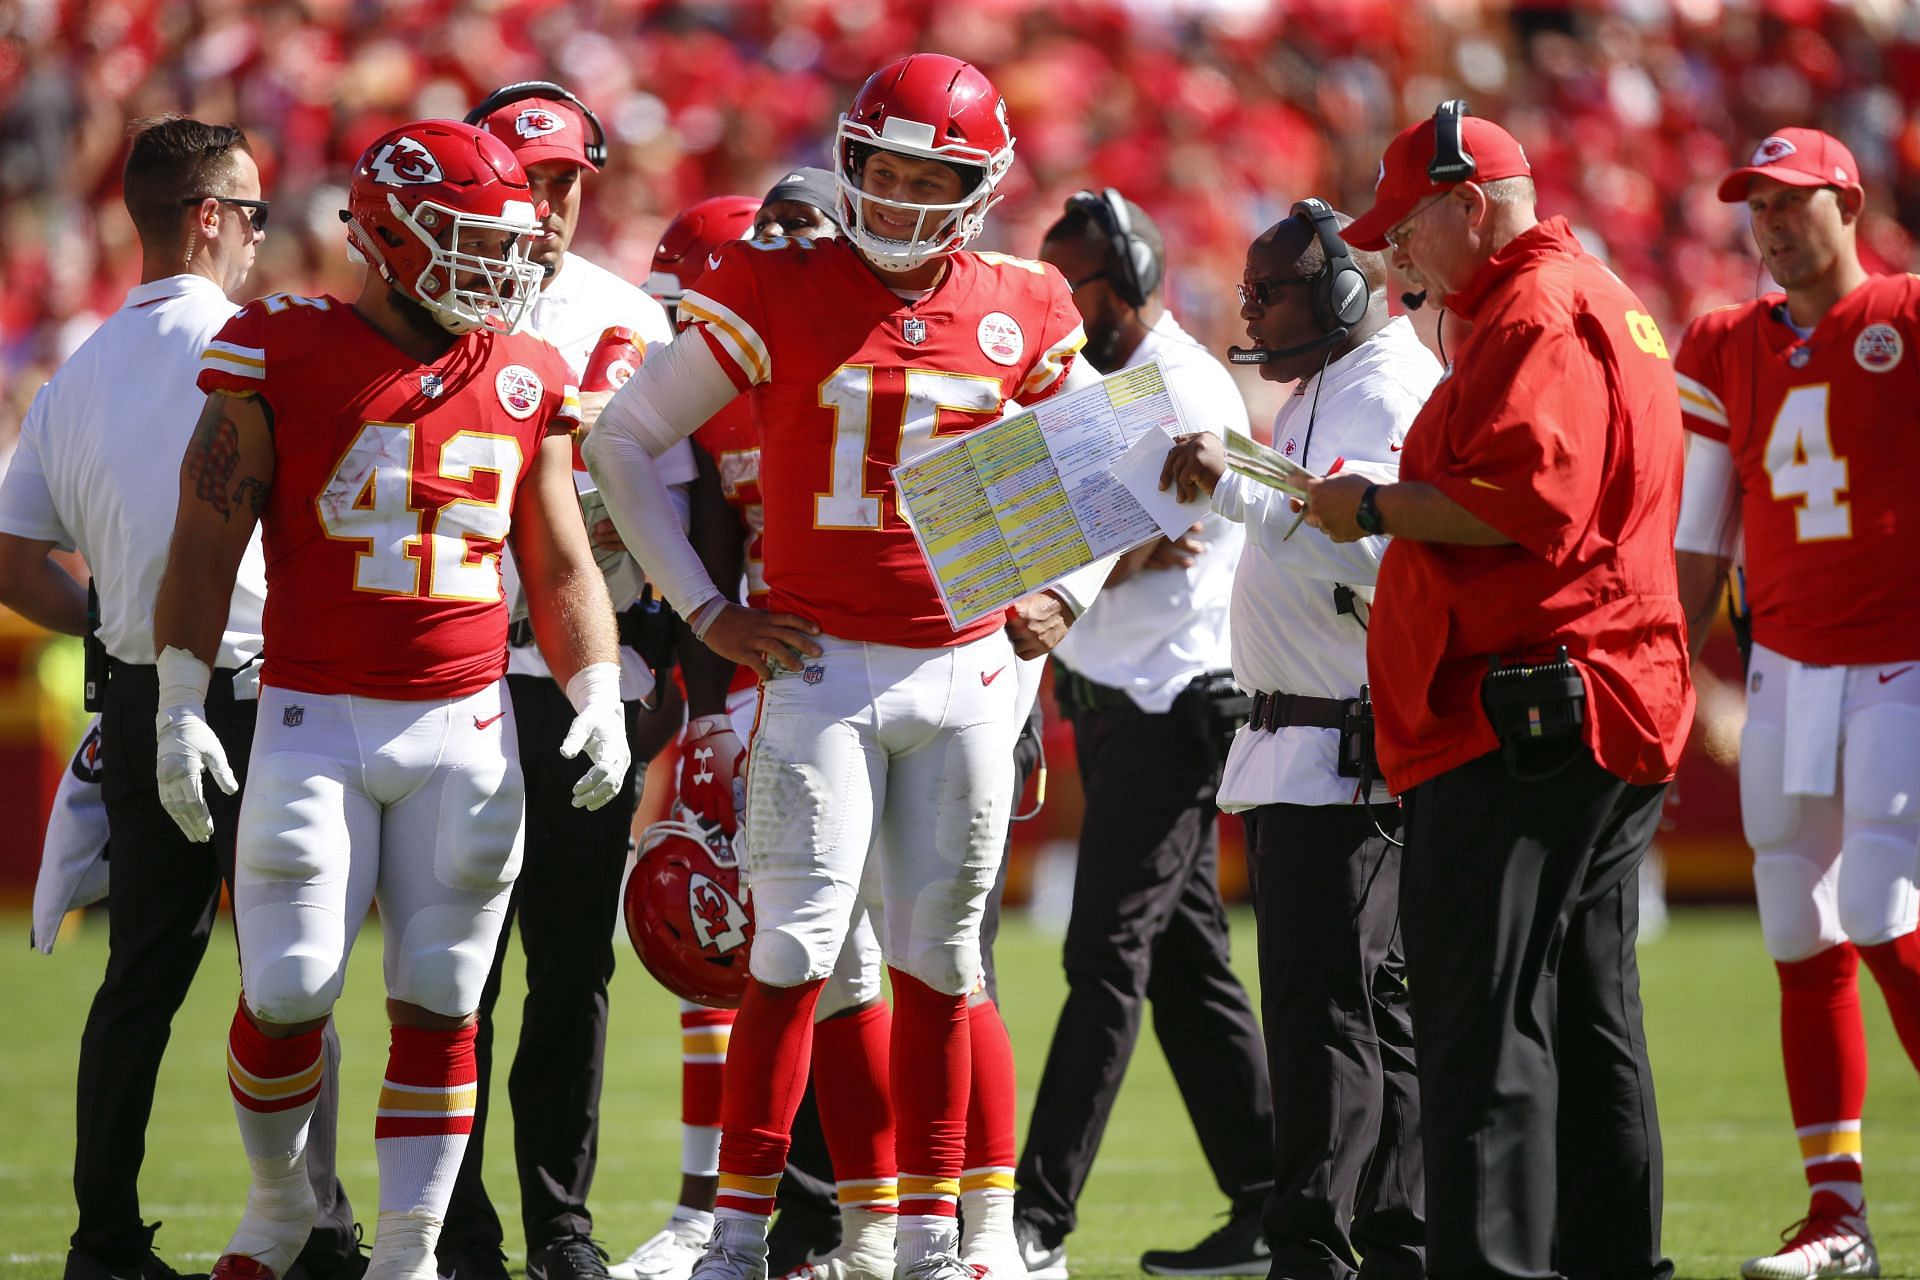 Chiefs' Patrick Mahomes says Eric Bieniemy's coaching style 'made me a  better player